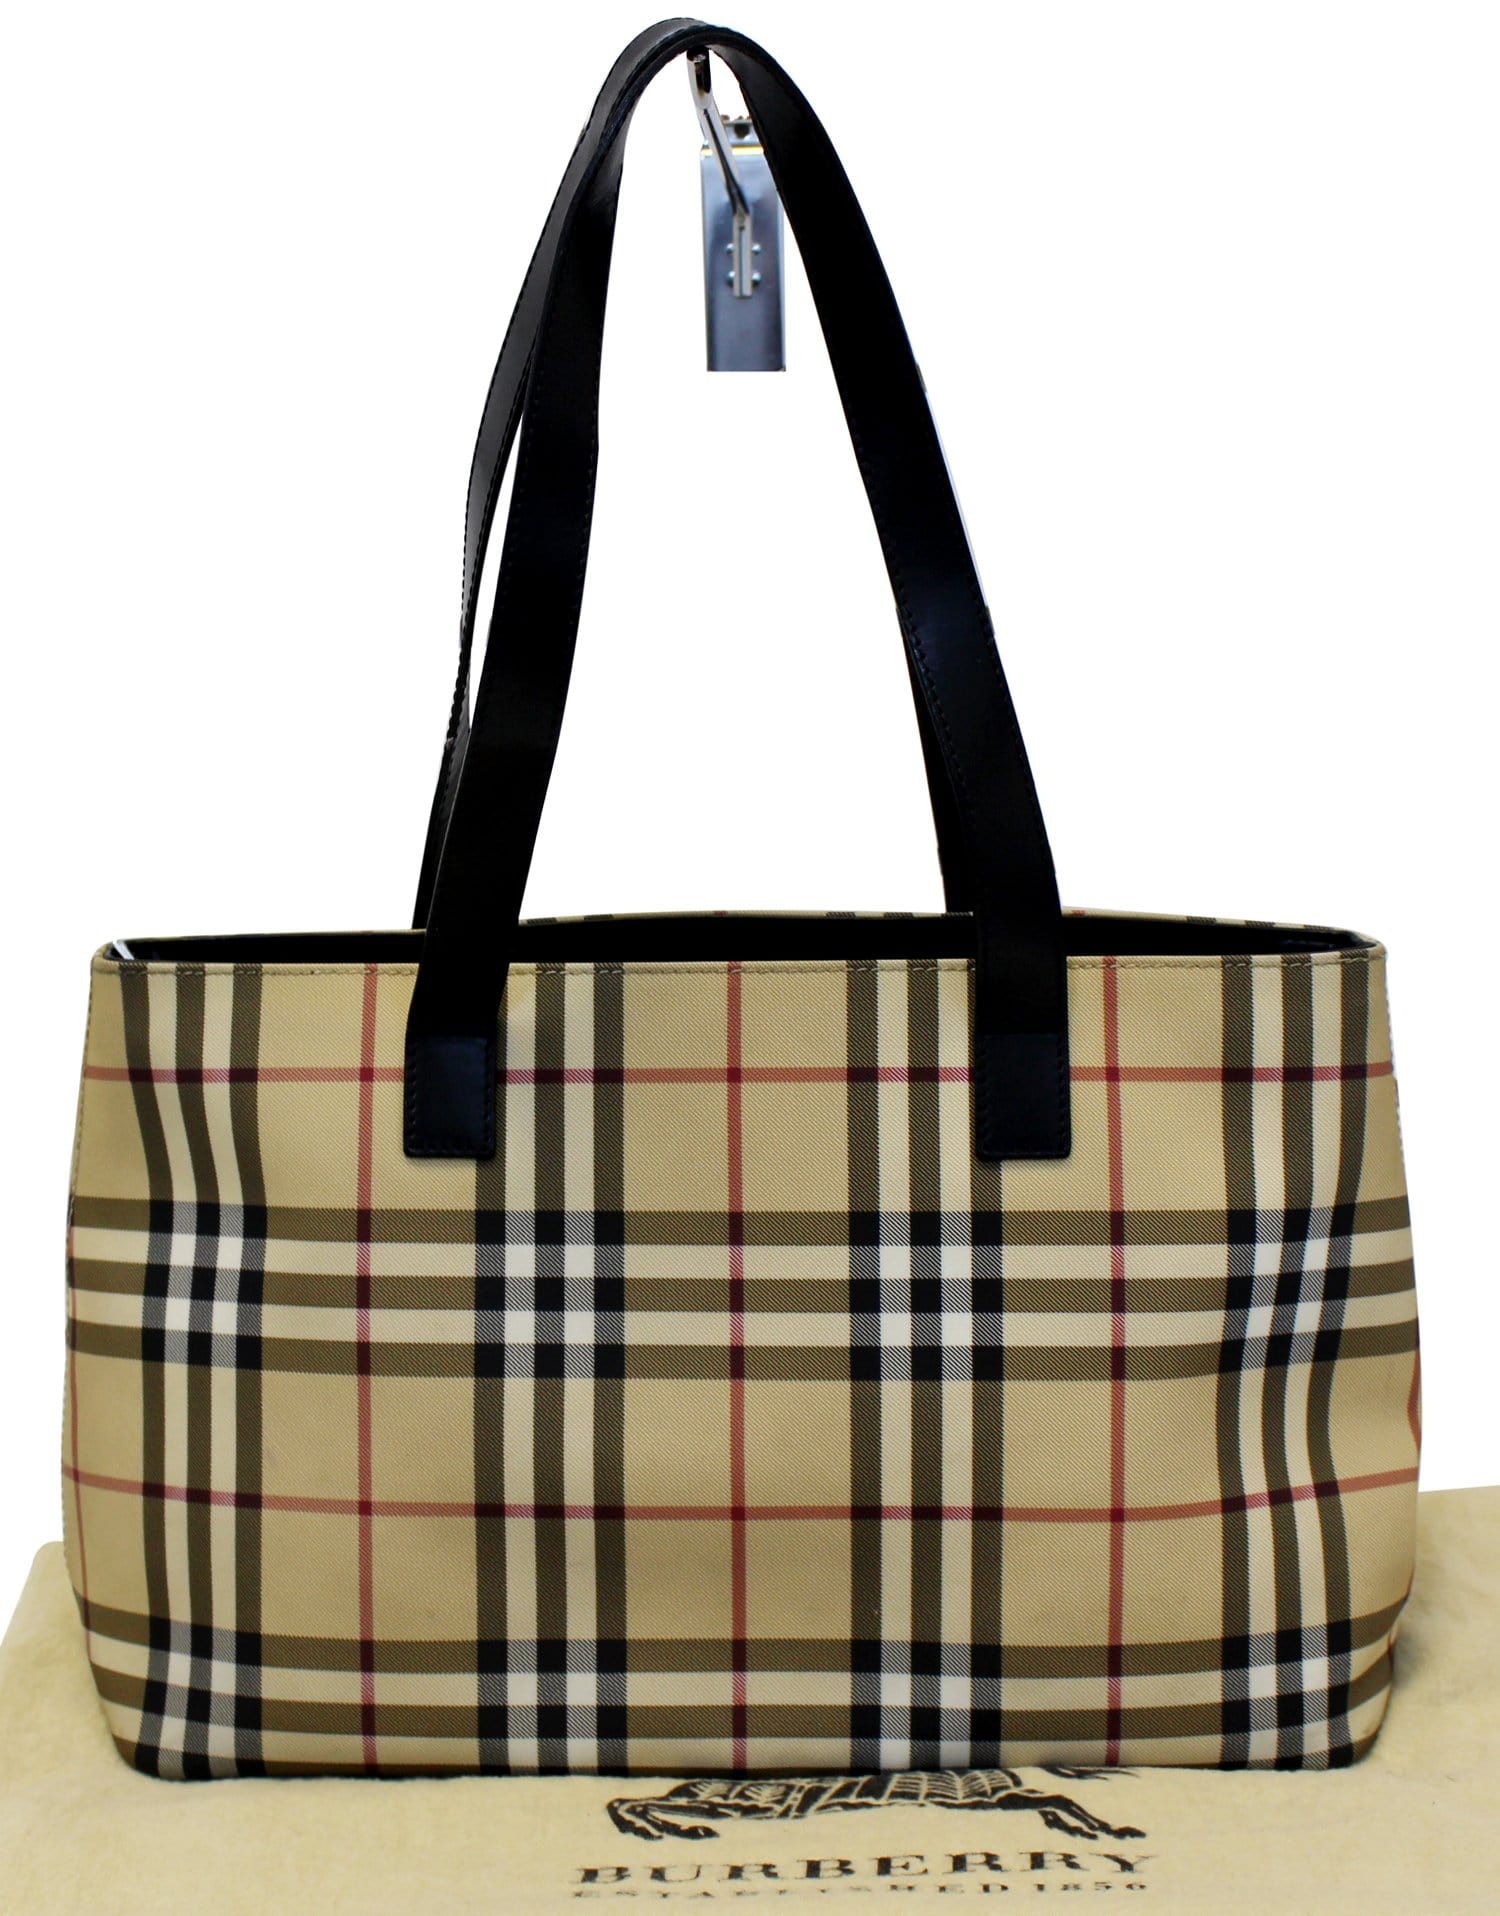 Authentic Burberry Novacheck Neverfull Type Tote Shoulder Bag In